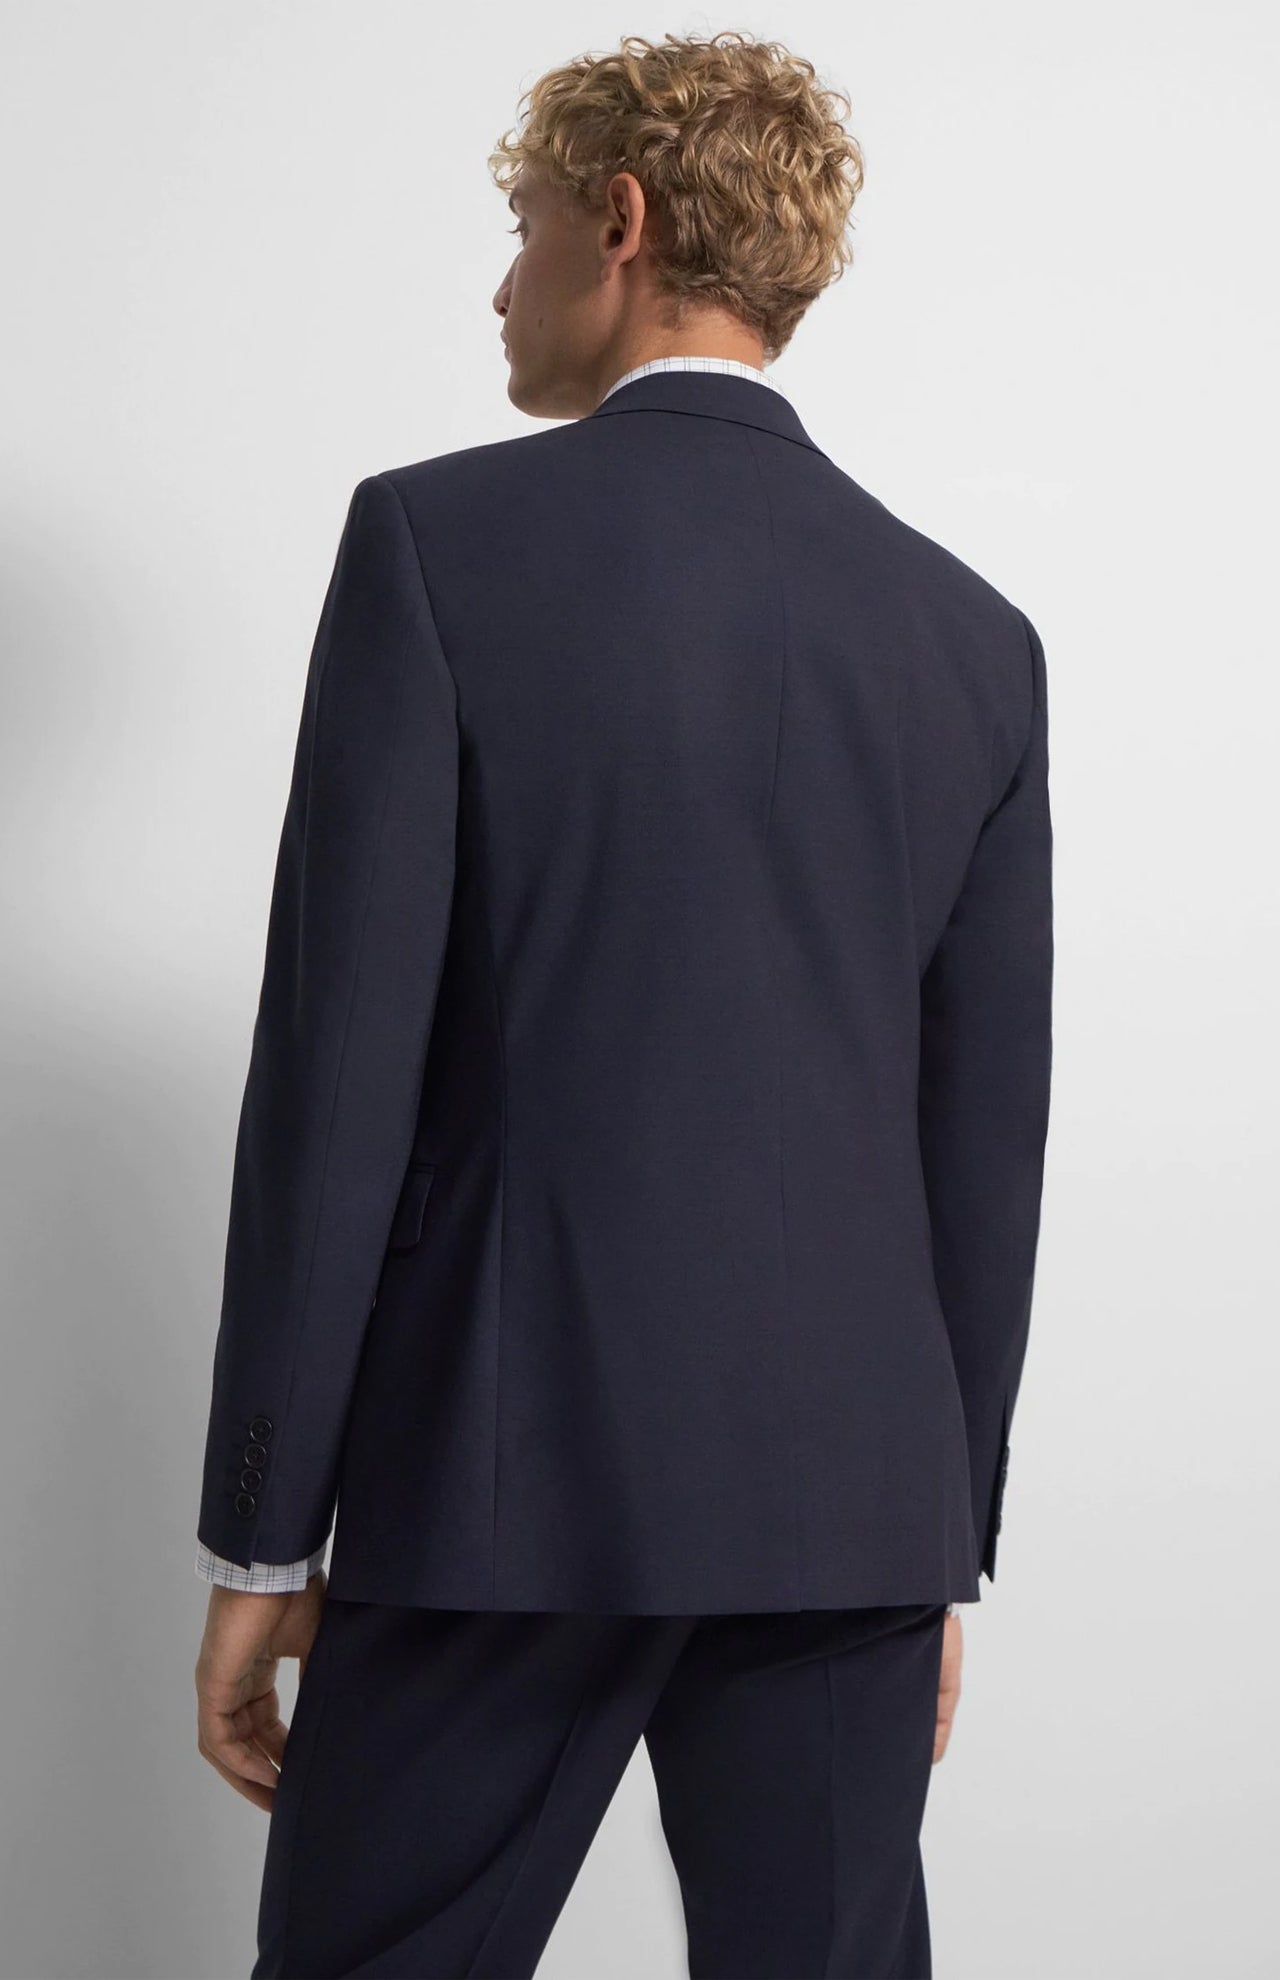 Theory Chambers New Tailor 2 Suit Jacket Navy Back Model Image (1737077162099)